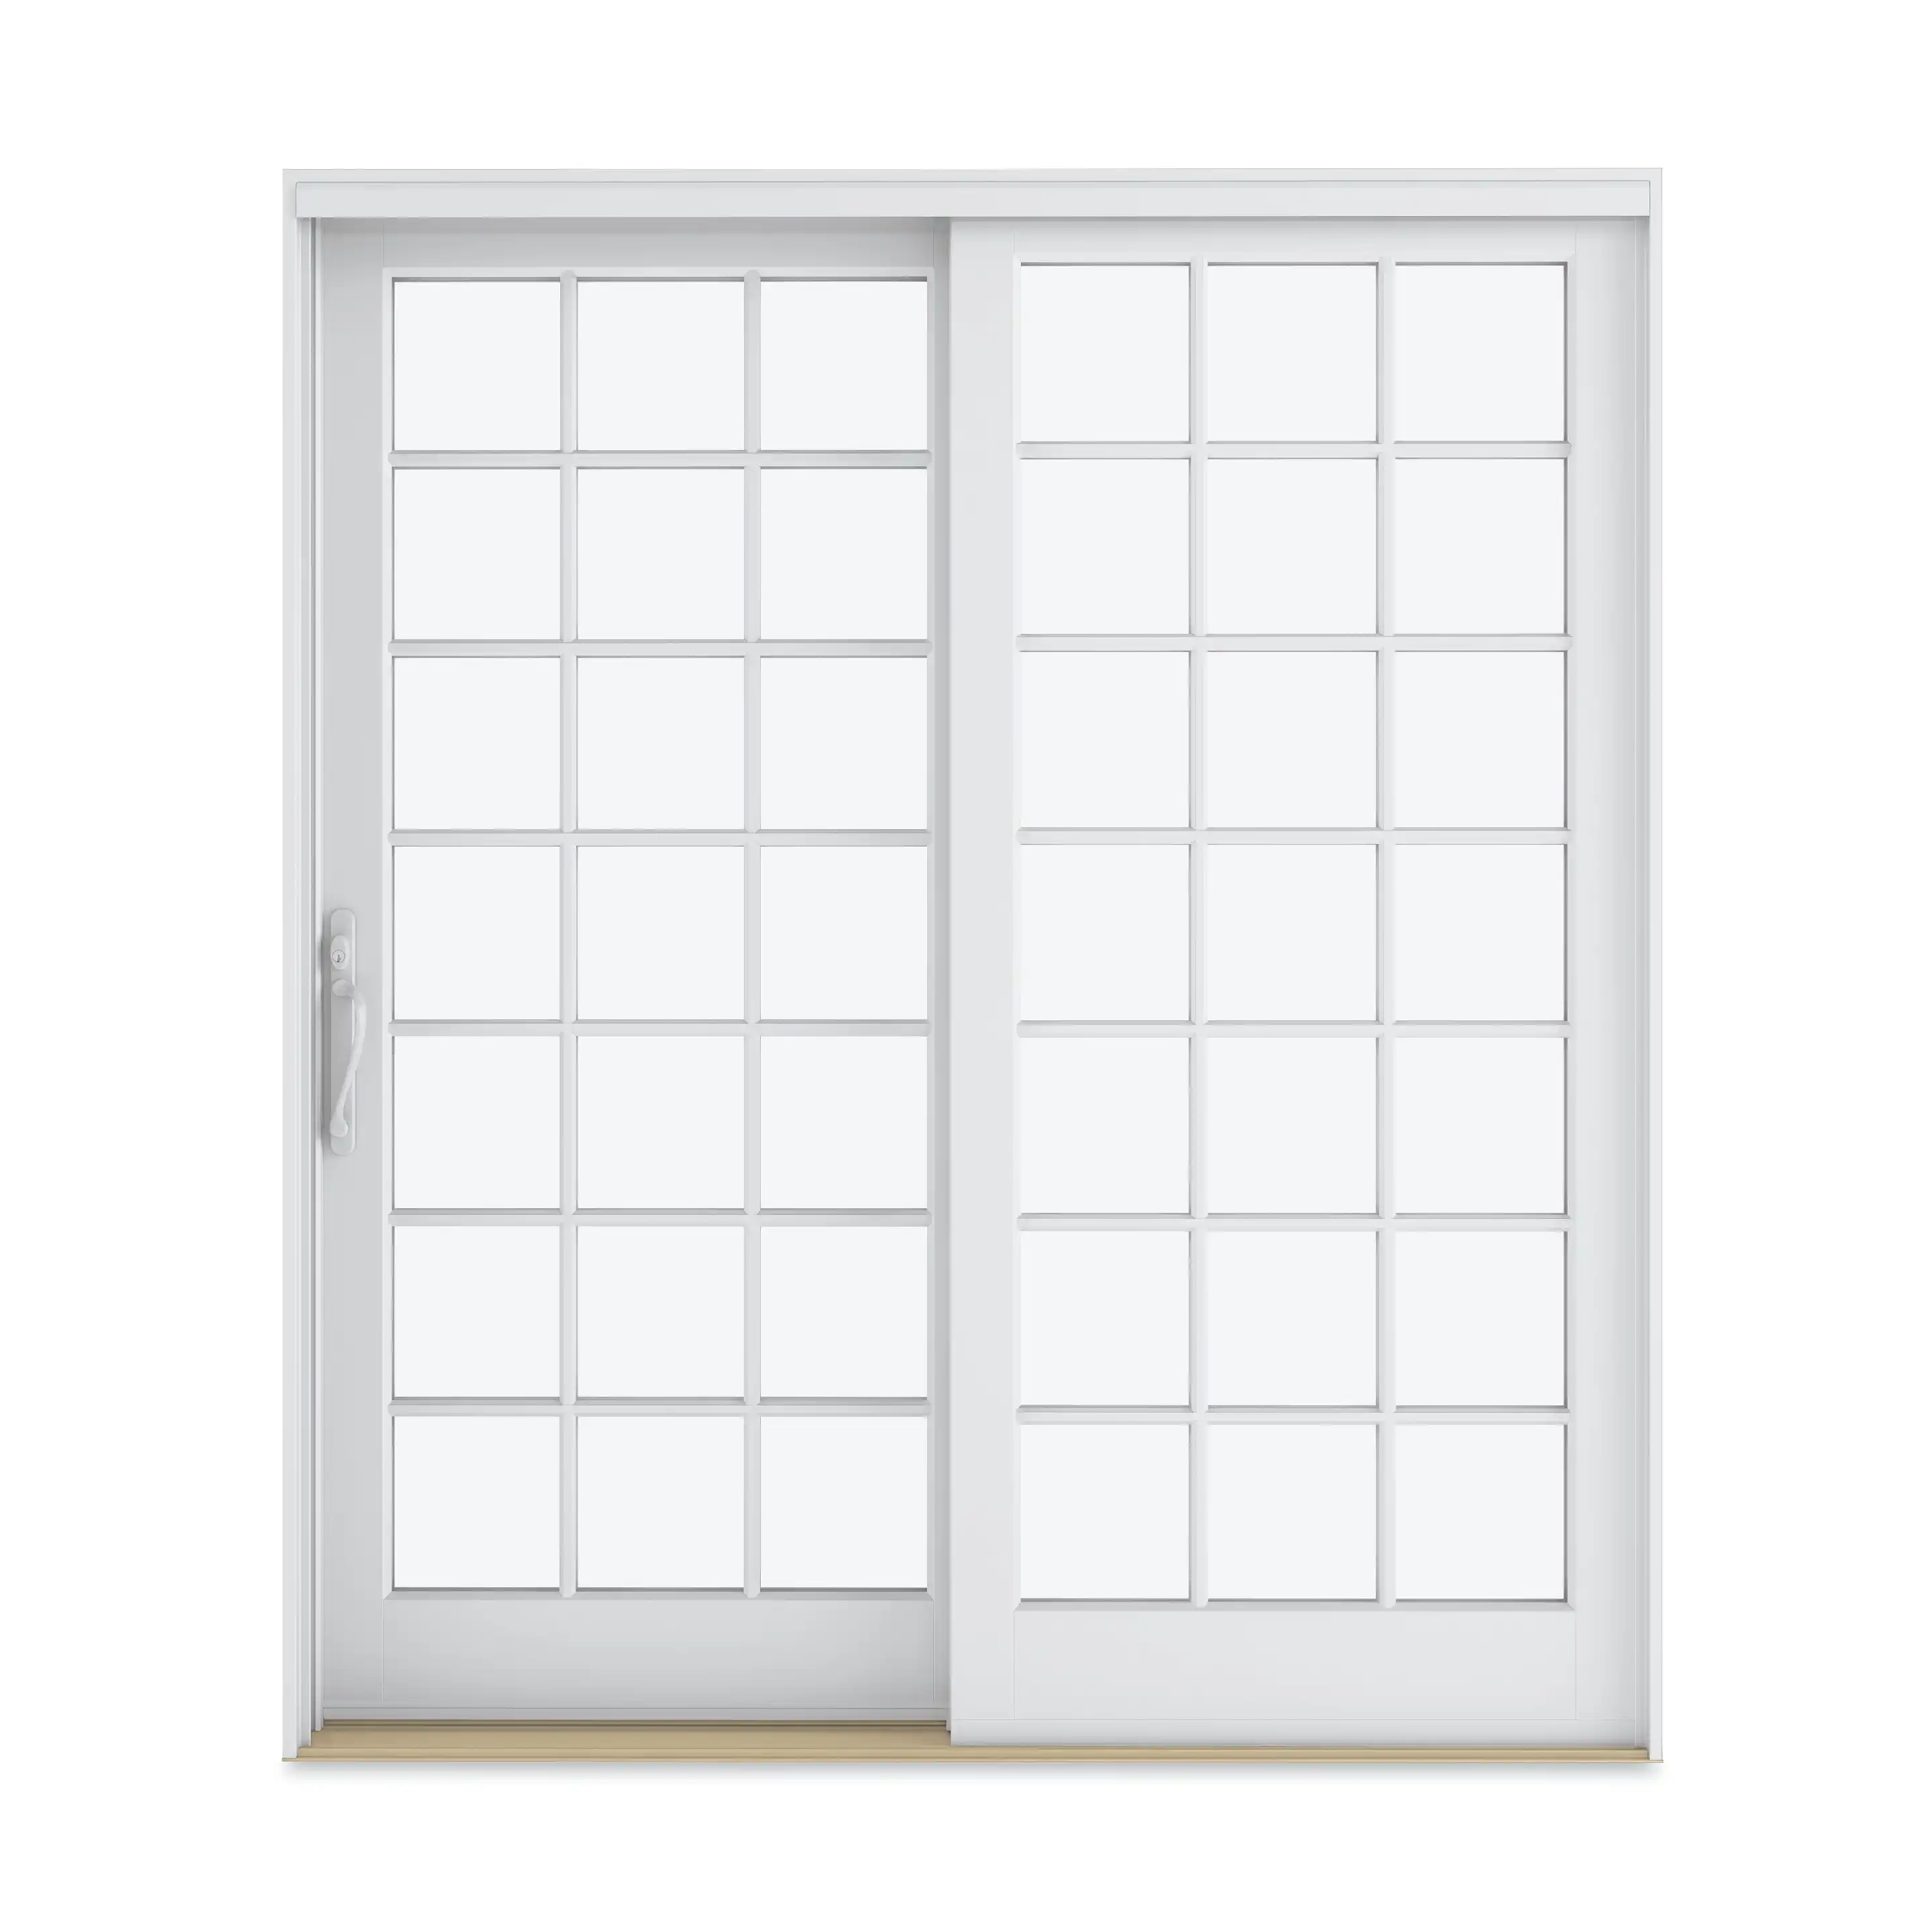 A white Marvin Replacement two-panel Sliding French door with Standard divided lite pattern.